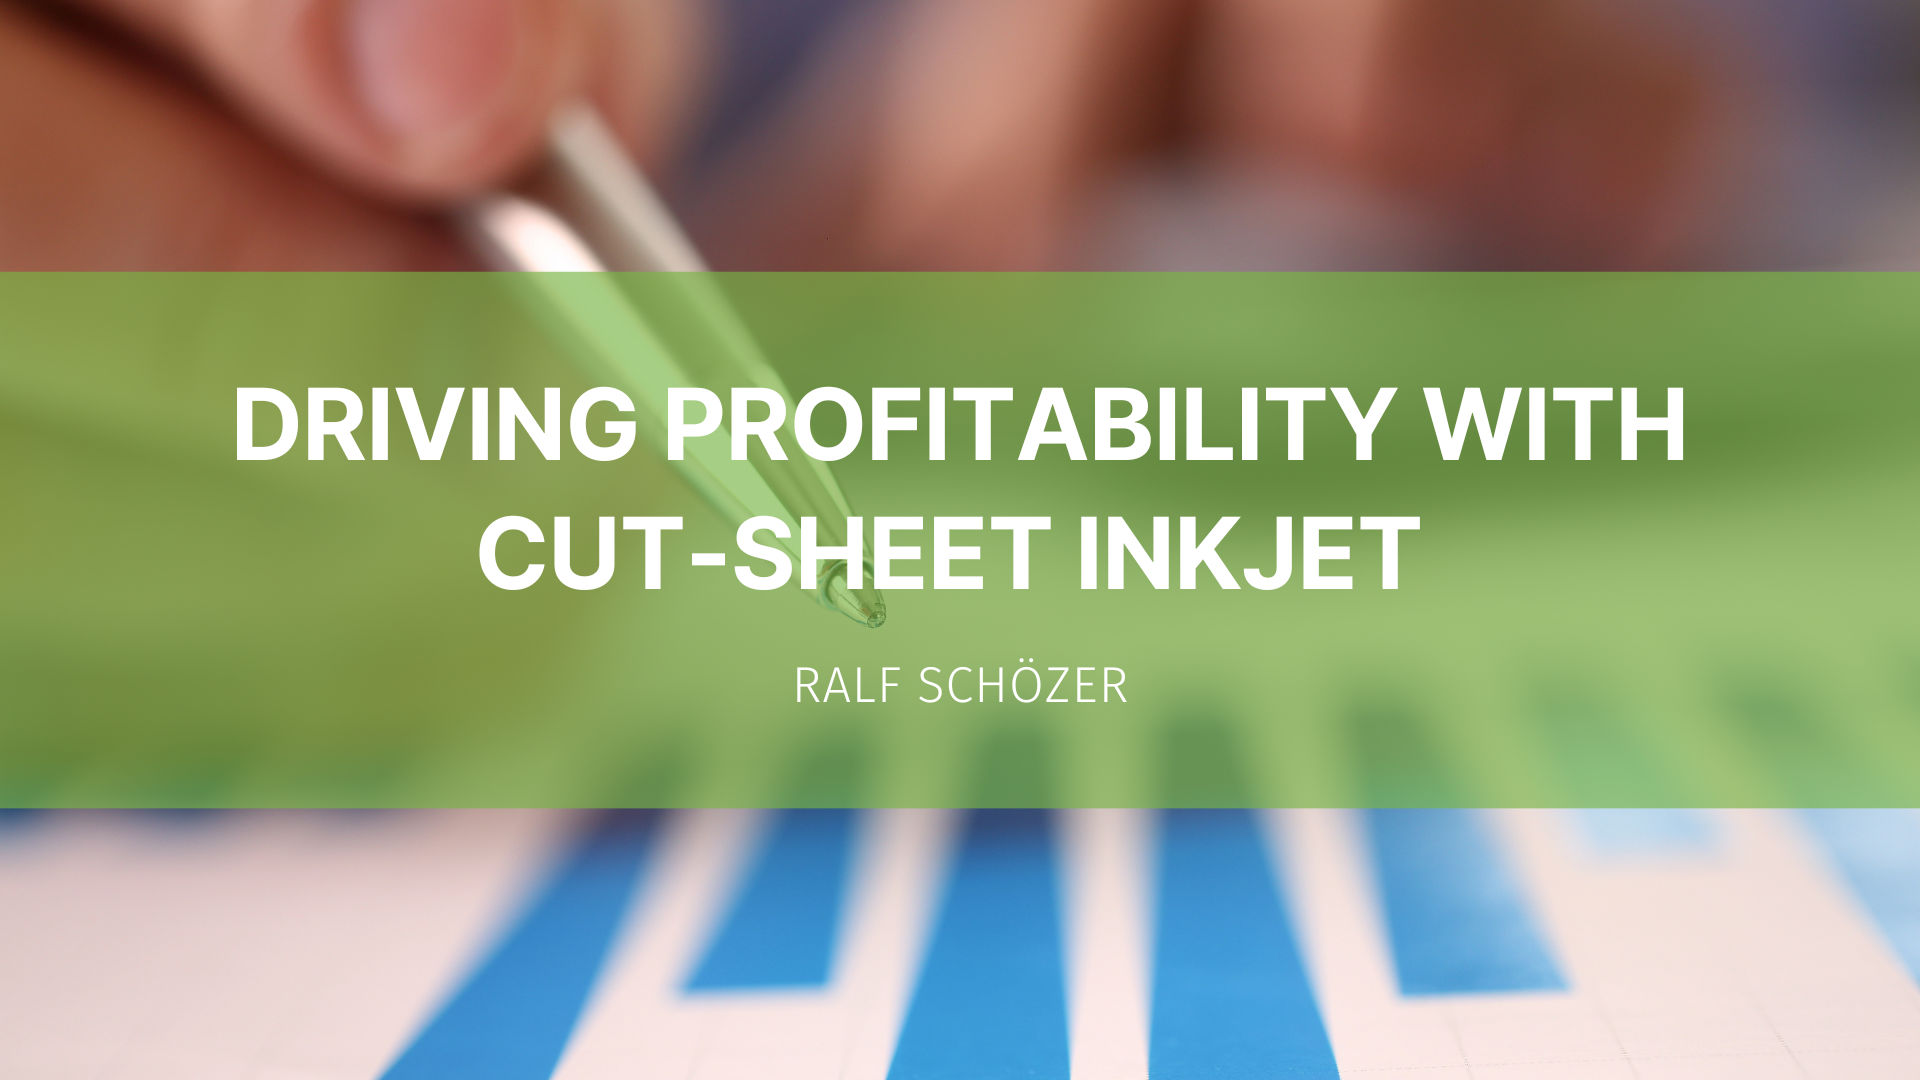 Featured image for “Driving profitability with cut-sheet inkjet”